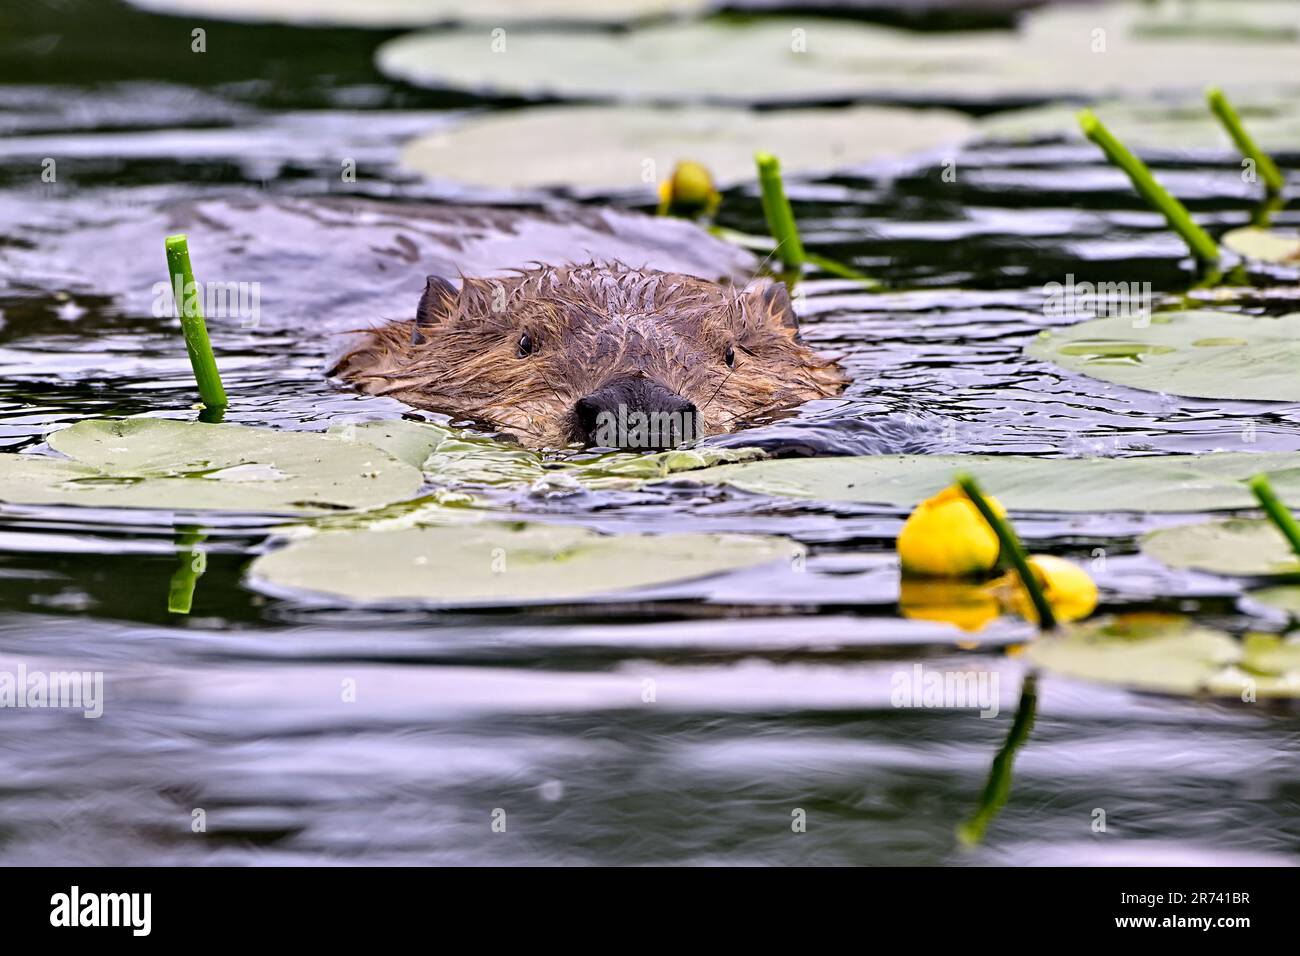 An adult beaver 'Castor canadensis', swimming through the lily pad water plants in a lake in rural Alberta Canada Stock Photo